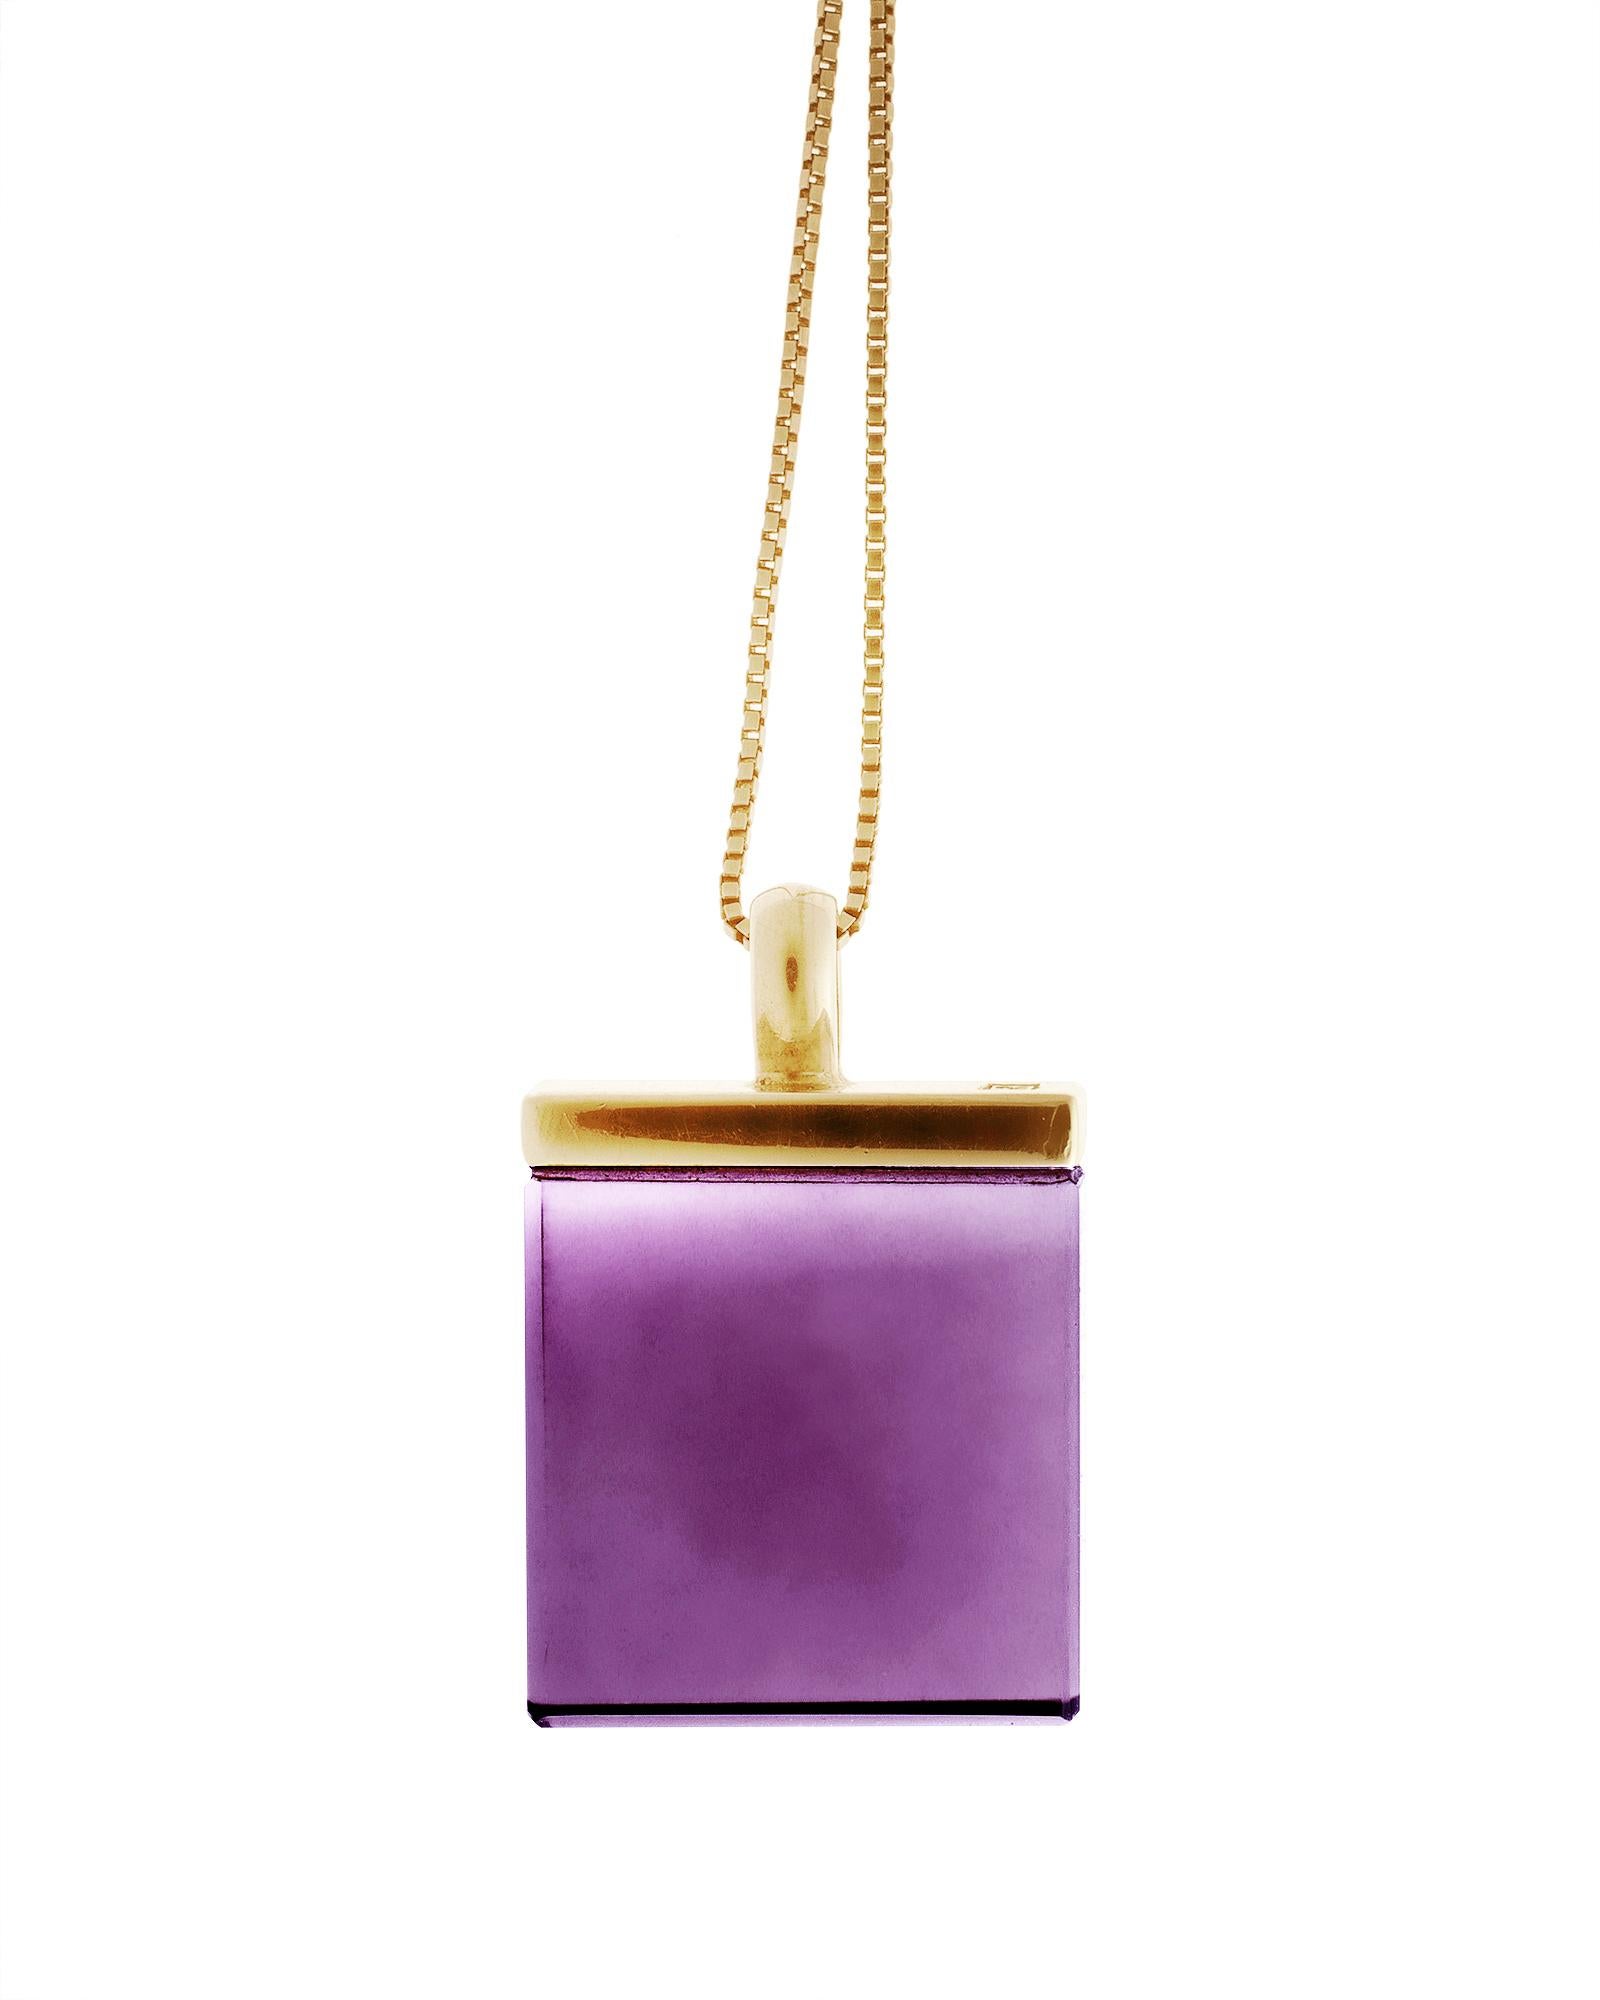 Rose Gold Contemporary Pendant Necklace with Natural Amethyst by Artist For Sale 1